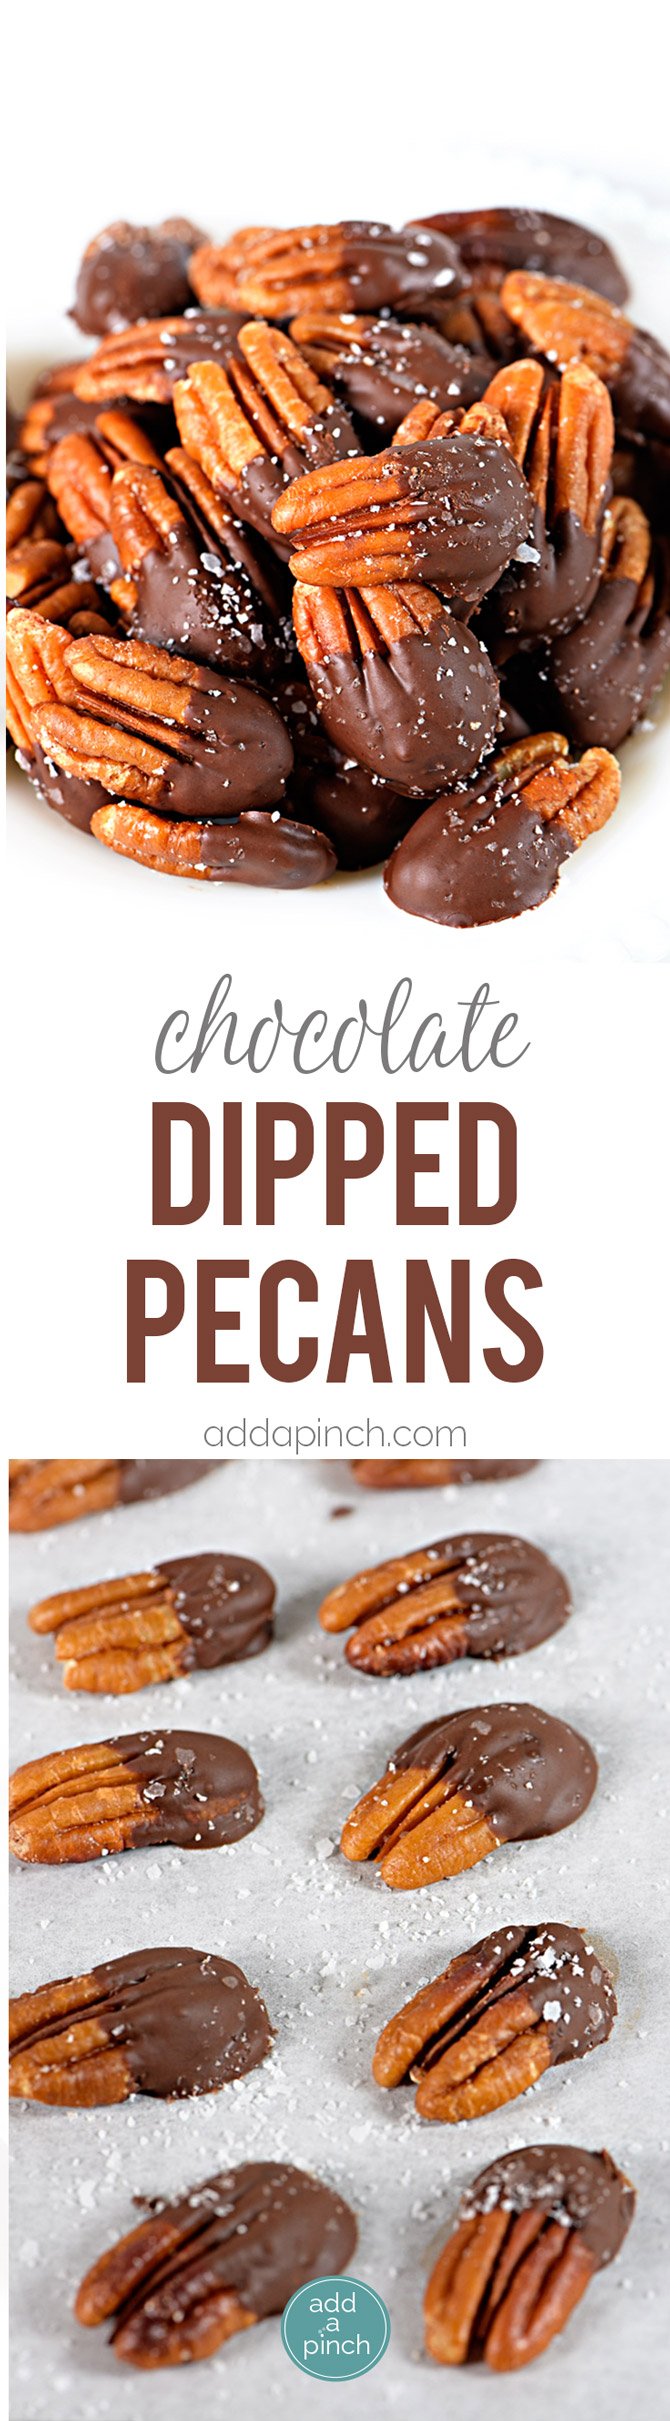 Chocolate Dipped Pecans make an easy, yet elegant treat perfect for entertaining and gifts! // addapinch.com